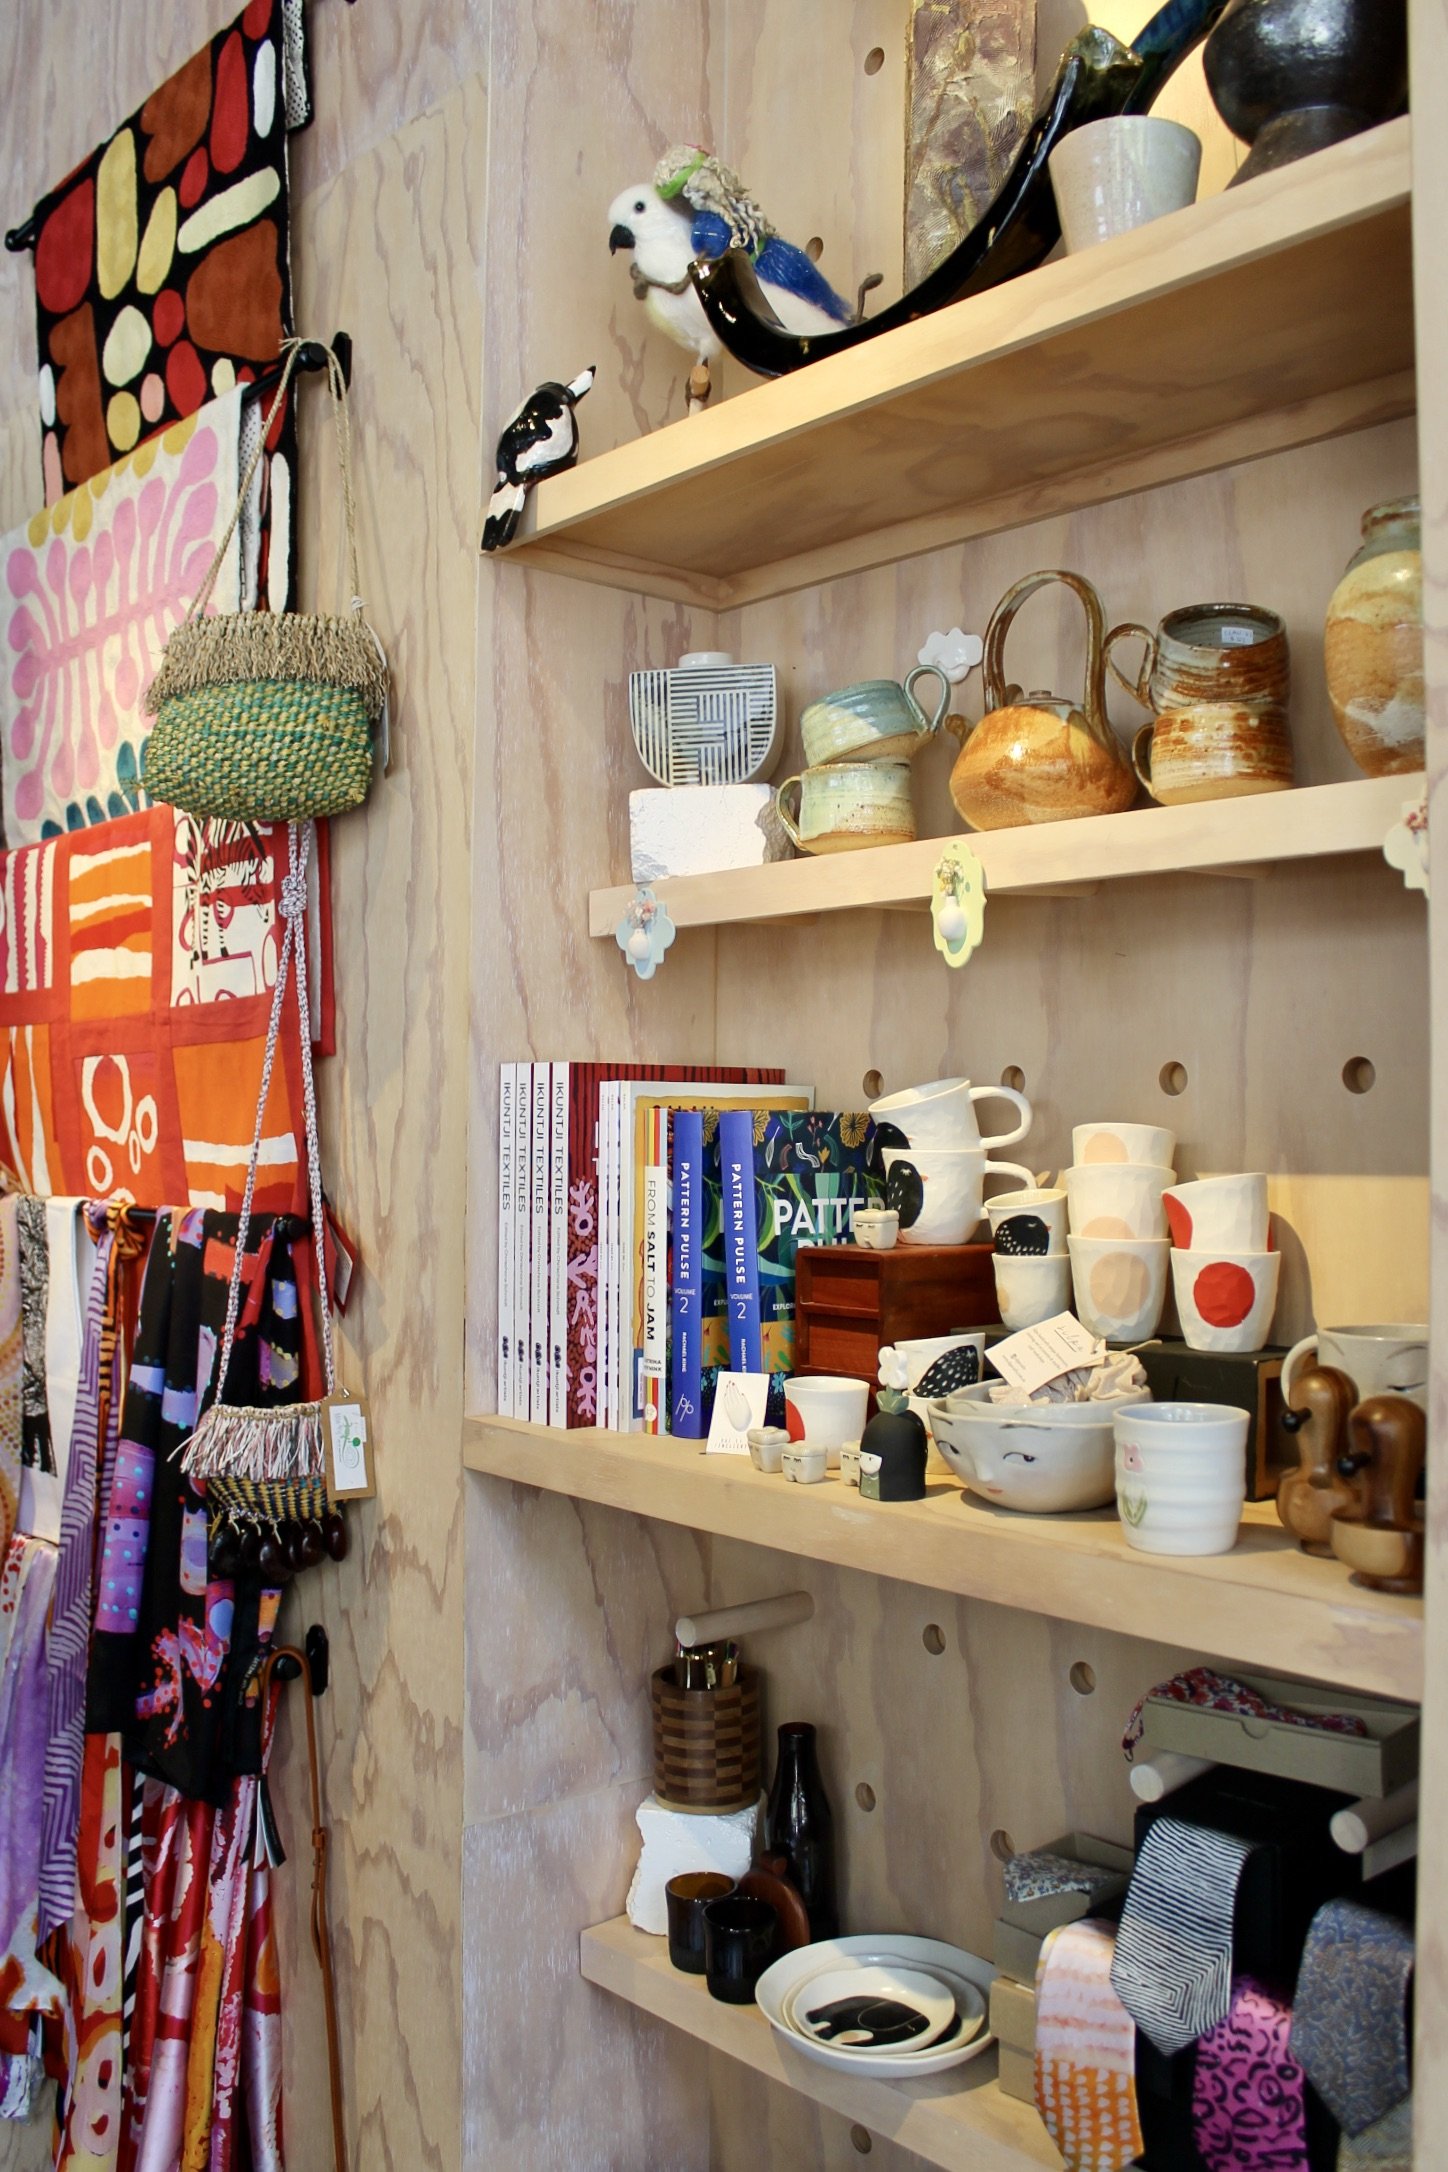 Artisan store featuring a range of Queensland makers and craftspeople